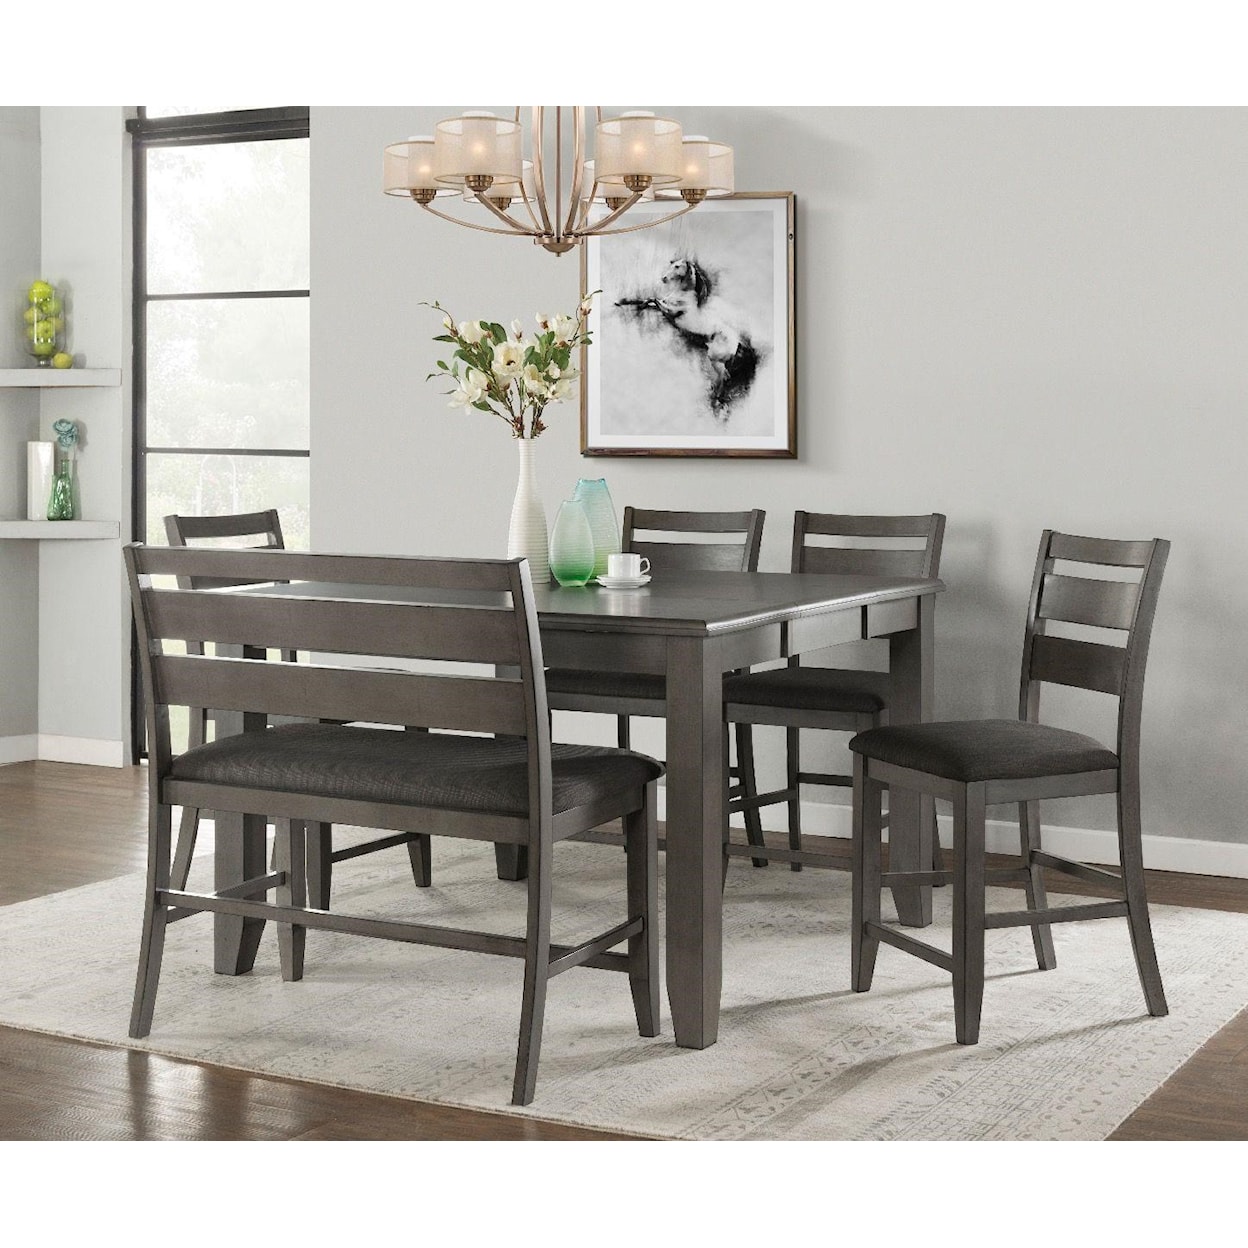 Vilo Home Mason Table with Bench and 4 Stools